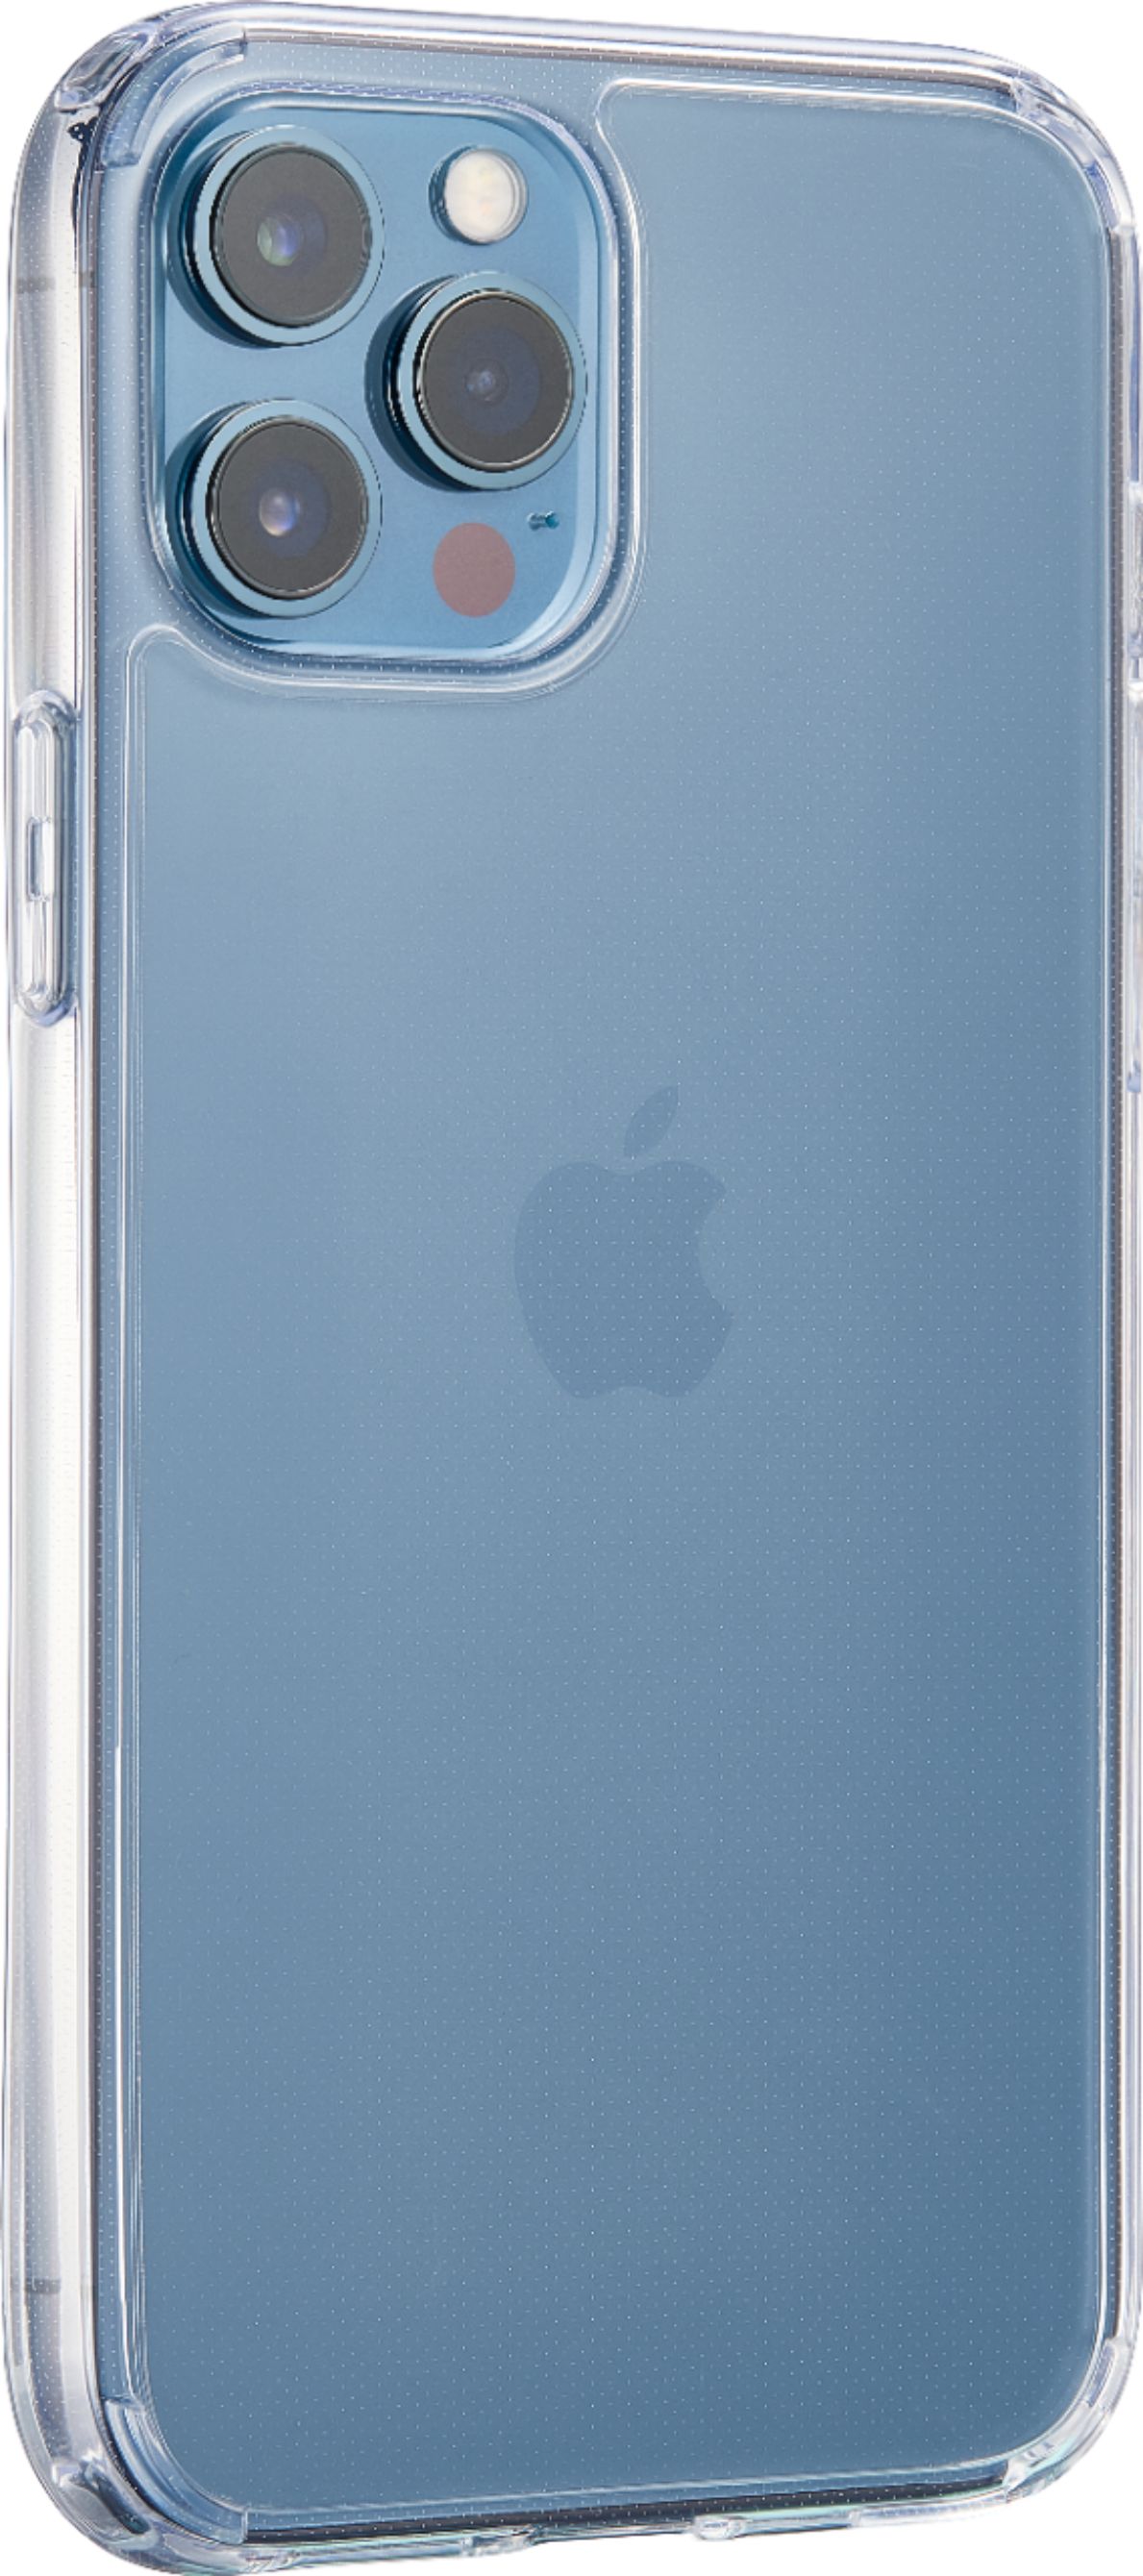 Angle View: Apple - iPhone 14 Pro Max 512GB - Silver (AT&T)